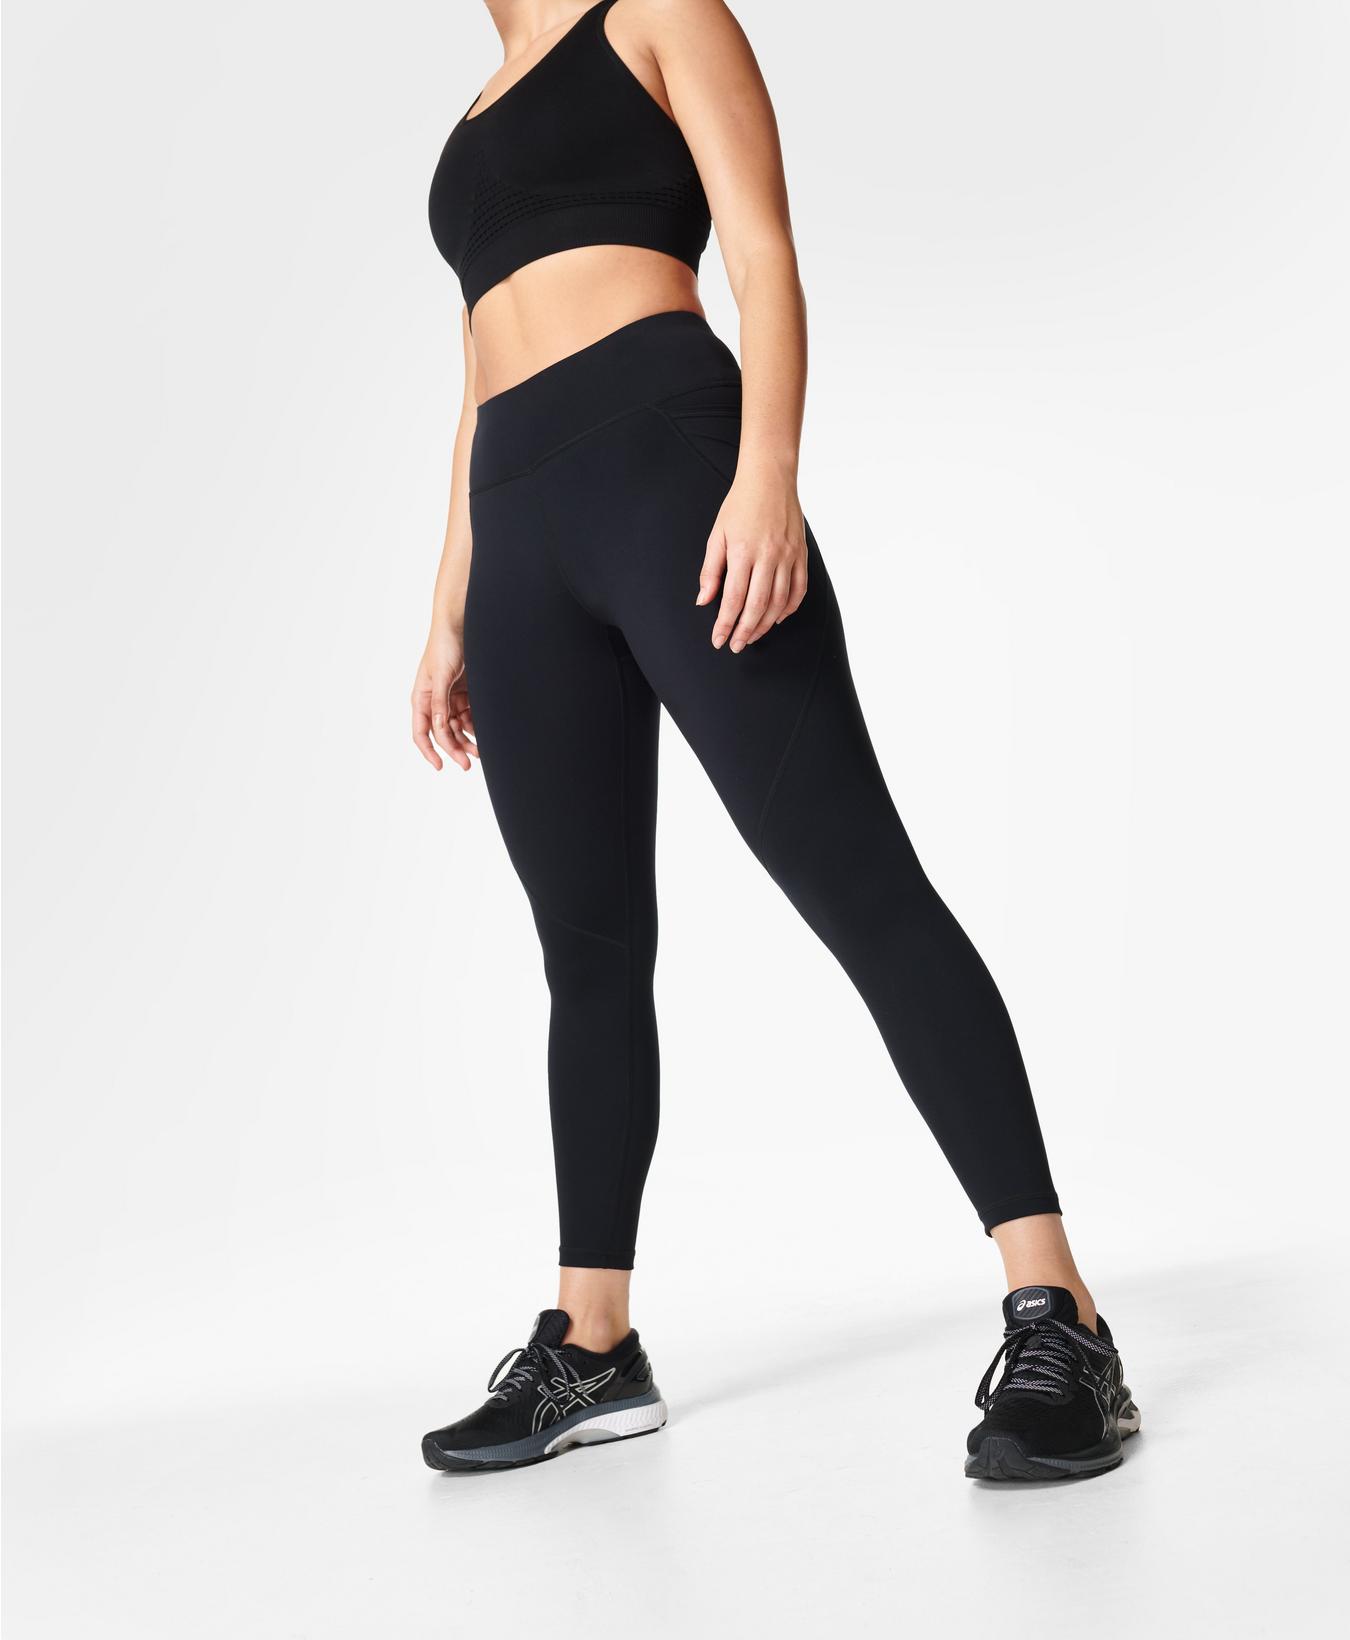 12 Best Compression Leggings for All Kinds of Workouts